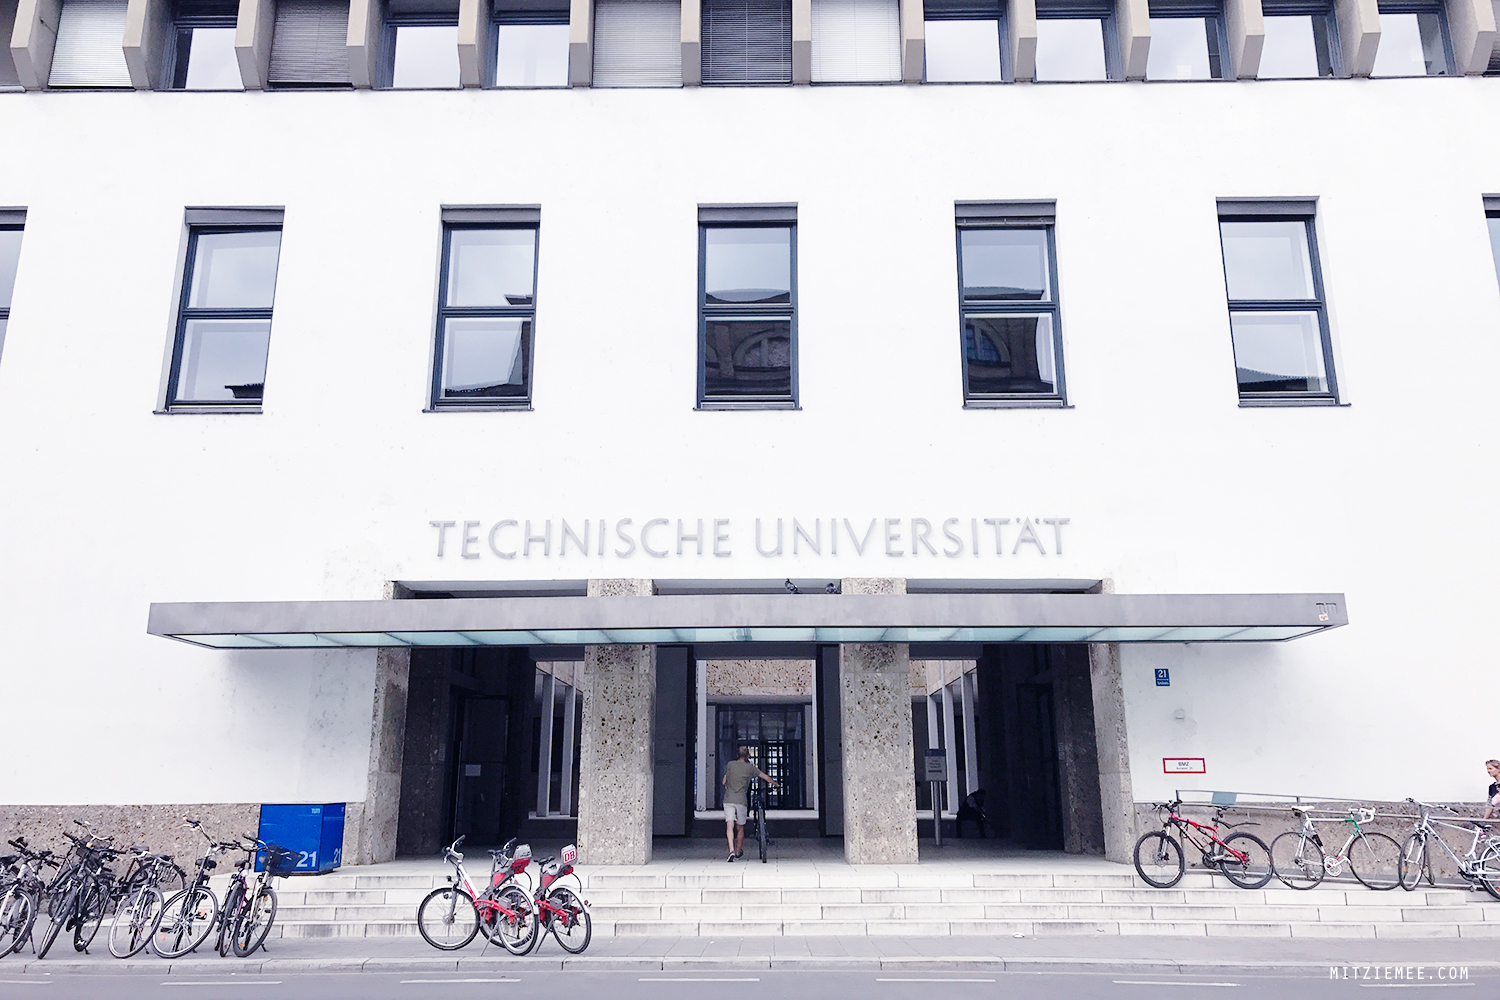 Architecture Department at the Technical University of Munich